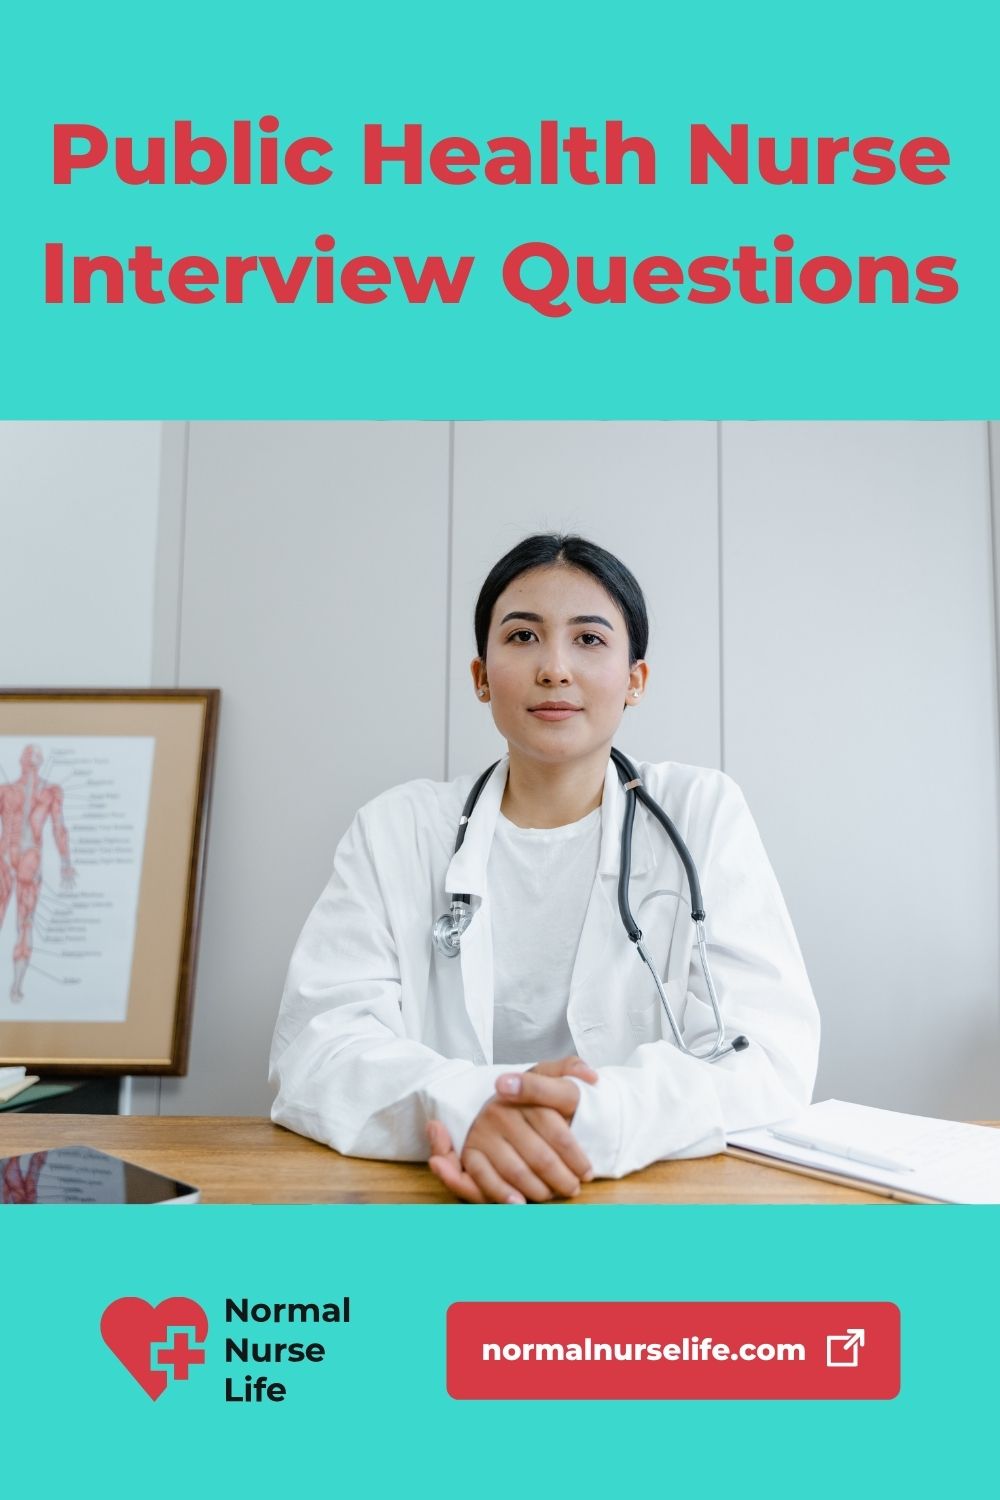 Public health nurse interview questions and answers